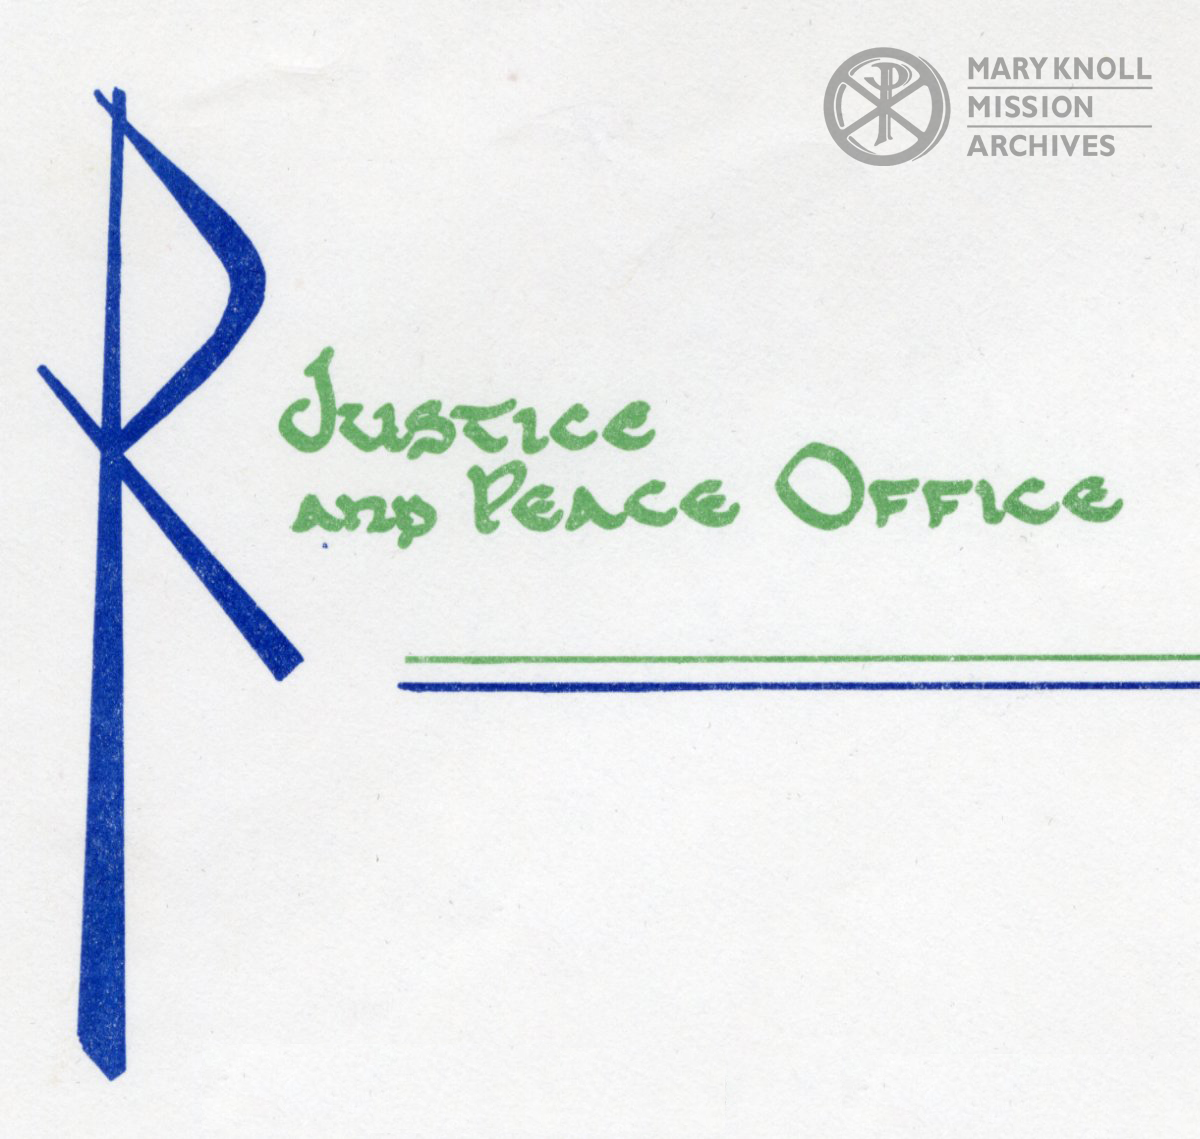 Letterhead for the Justice and Peace Office, c. 1978